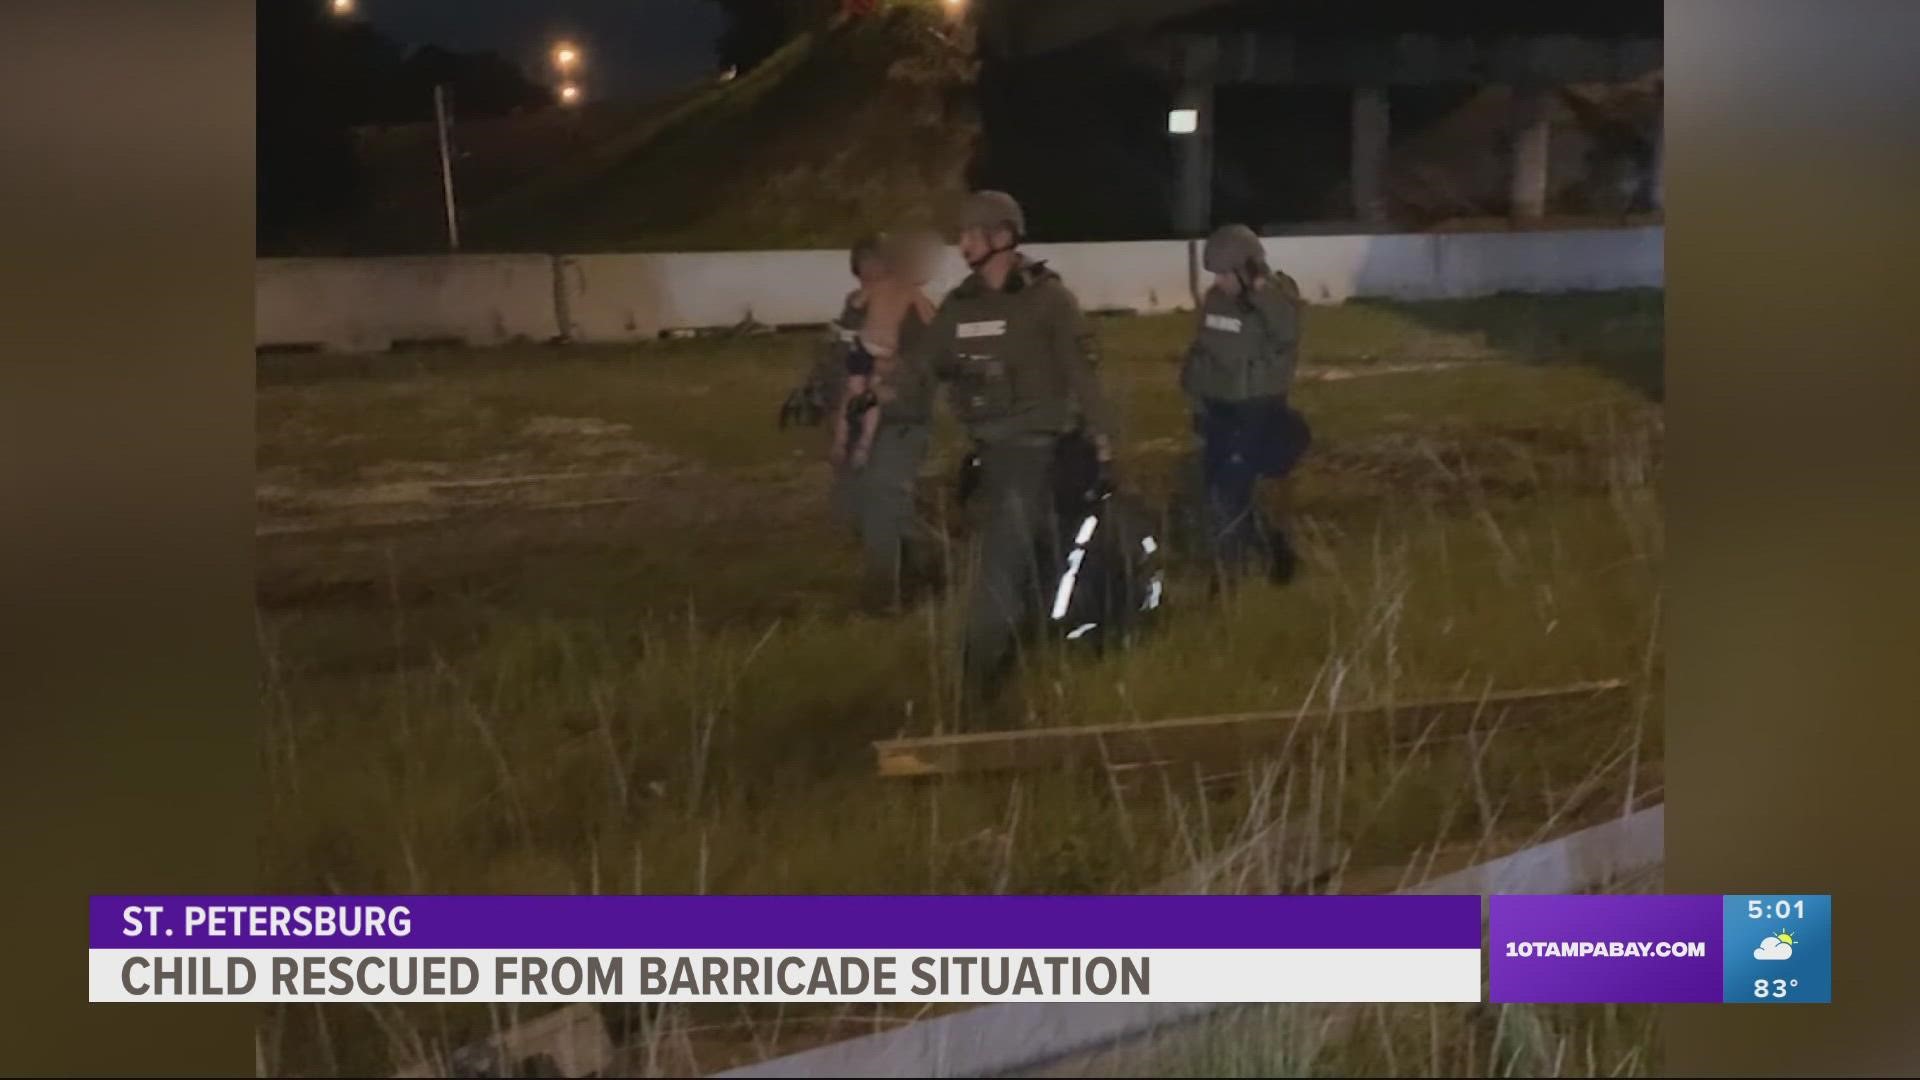 St. Petersburg police said the man used his son as a human shield during the standoff.